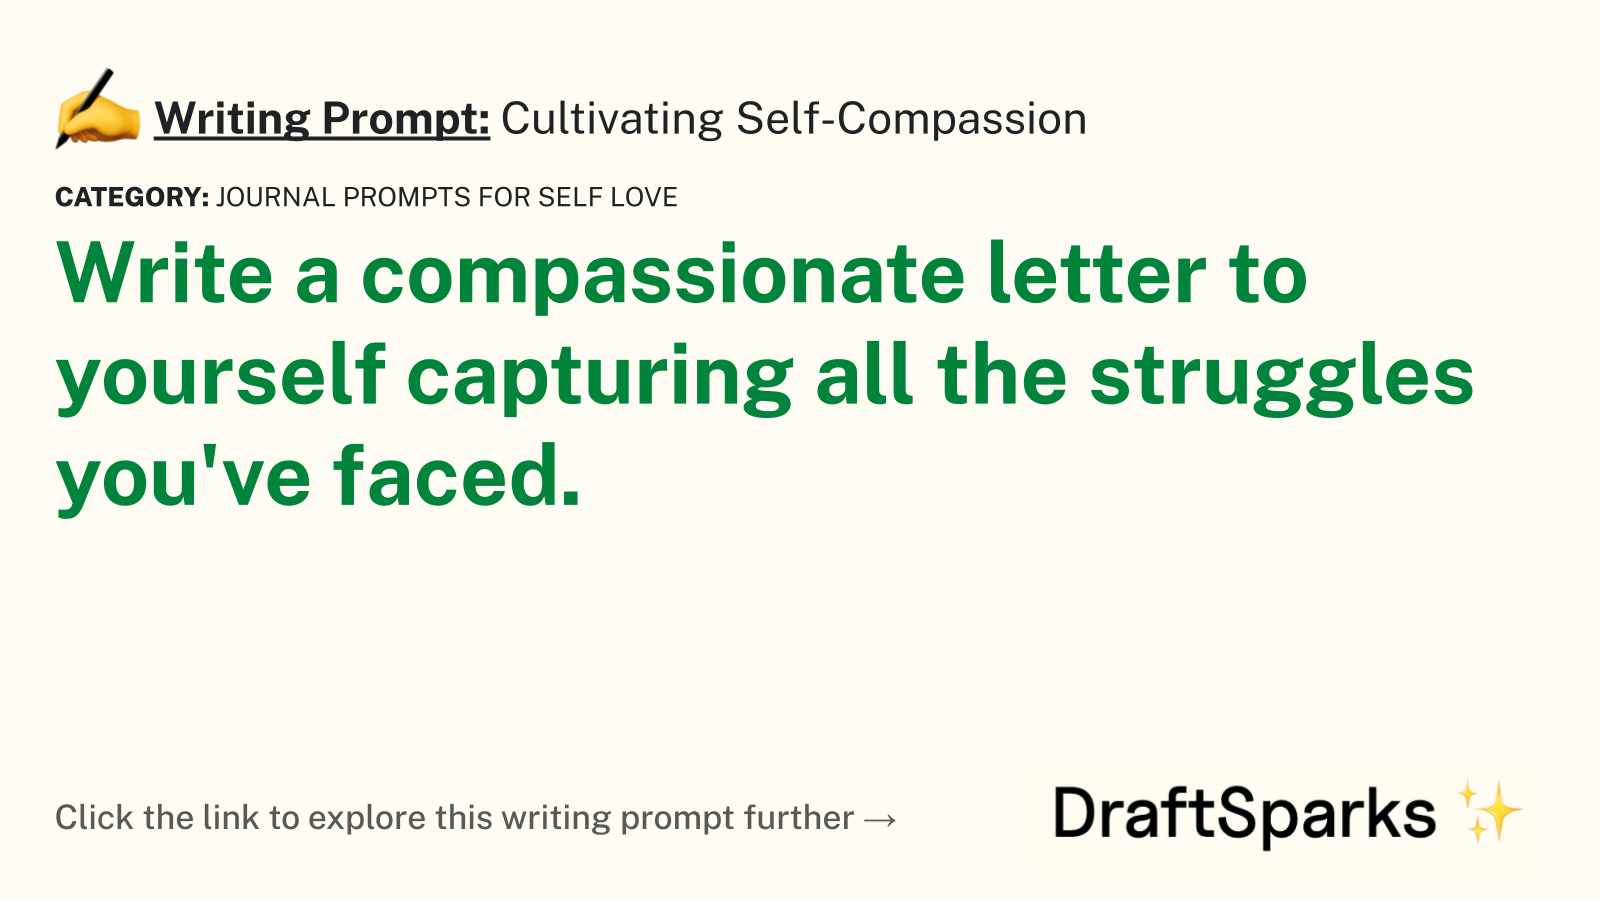 Cultivating Self-Compassion